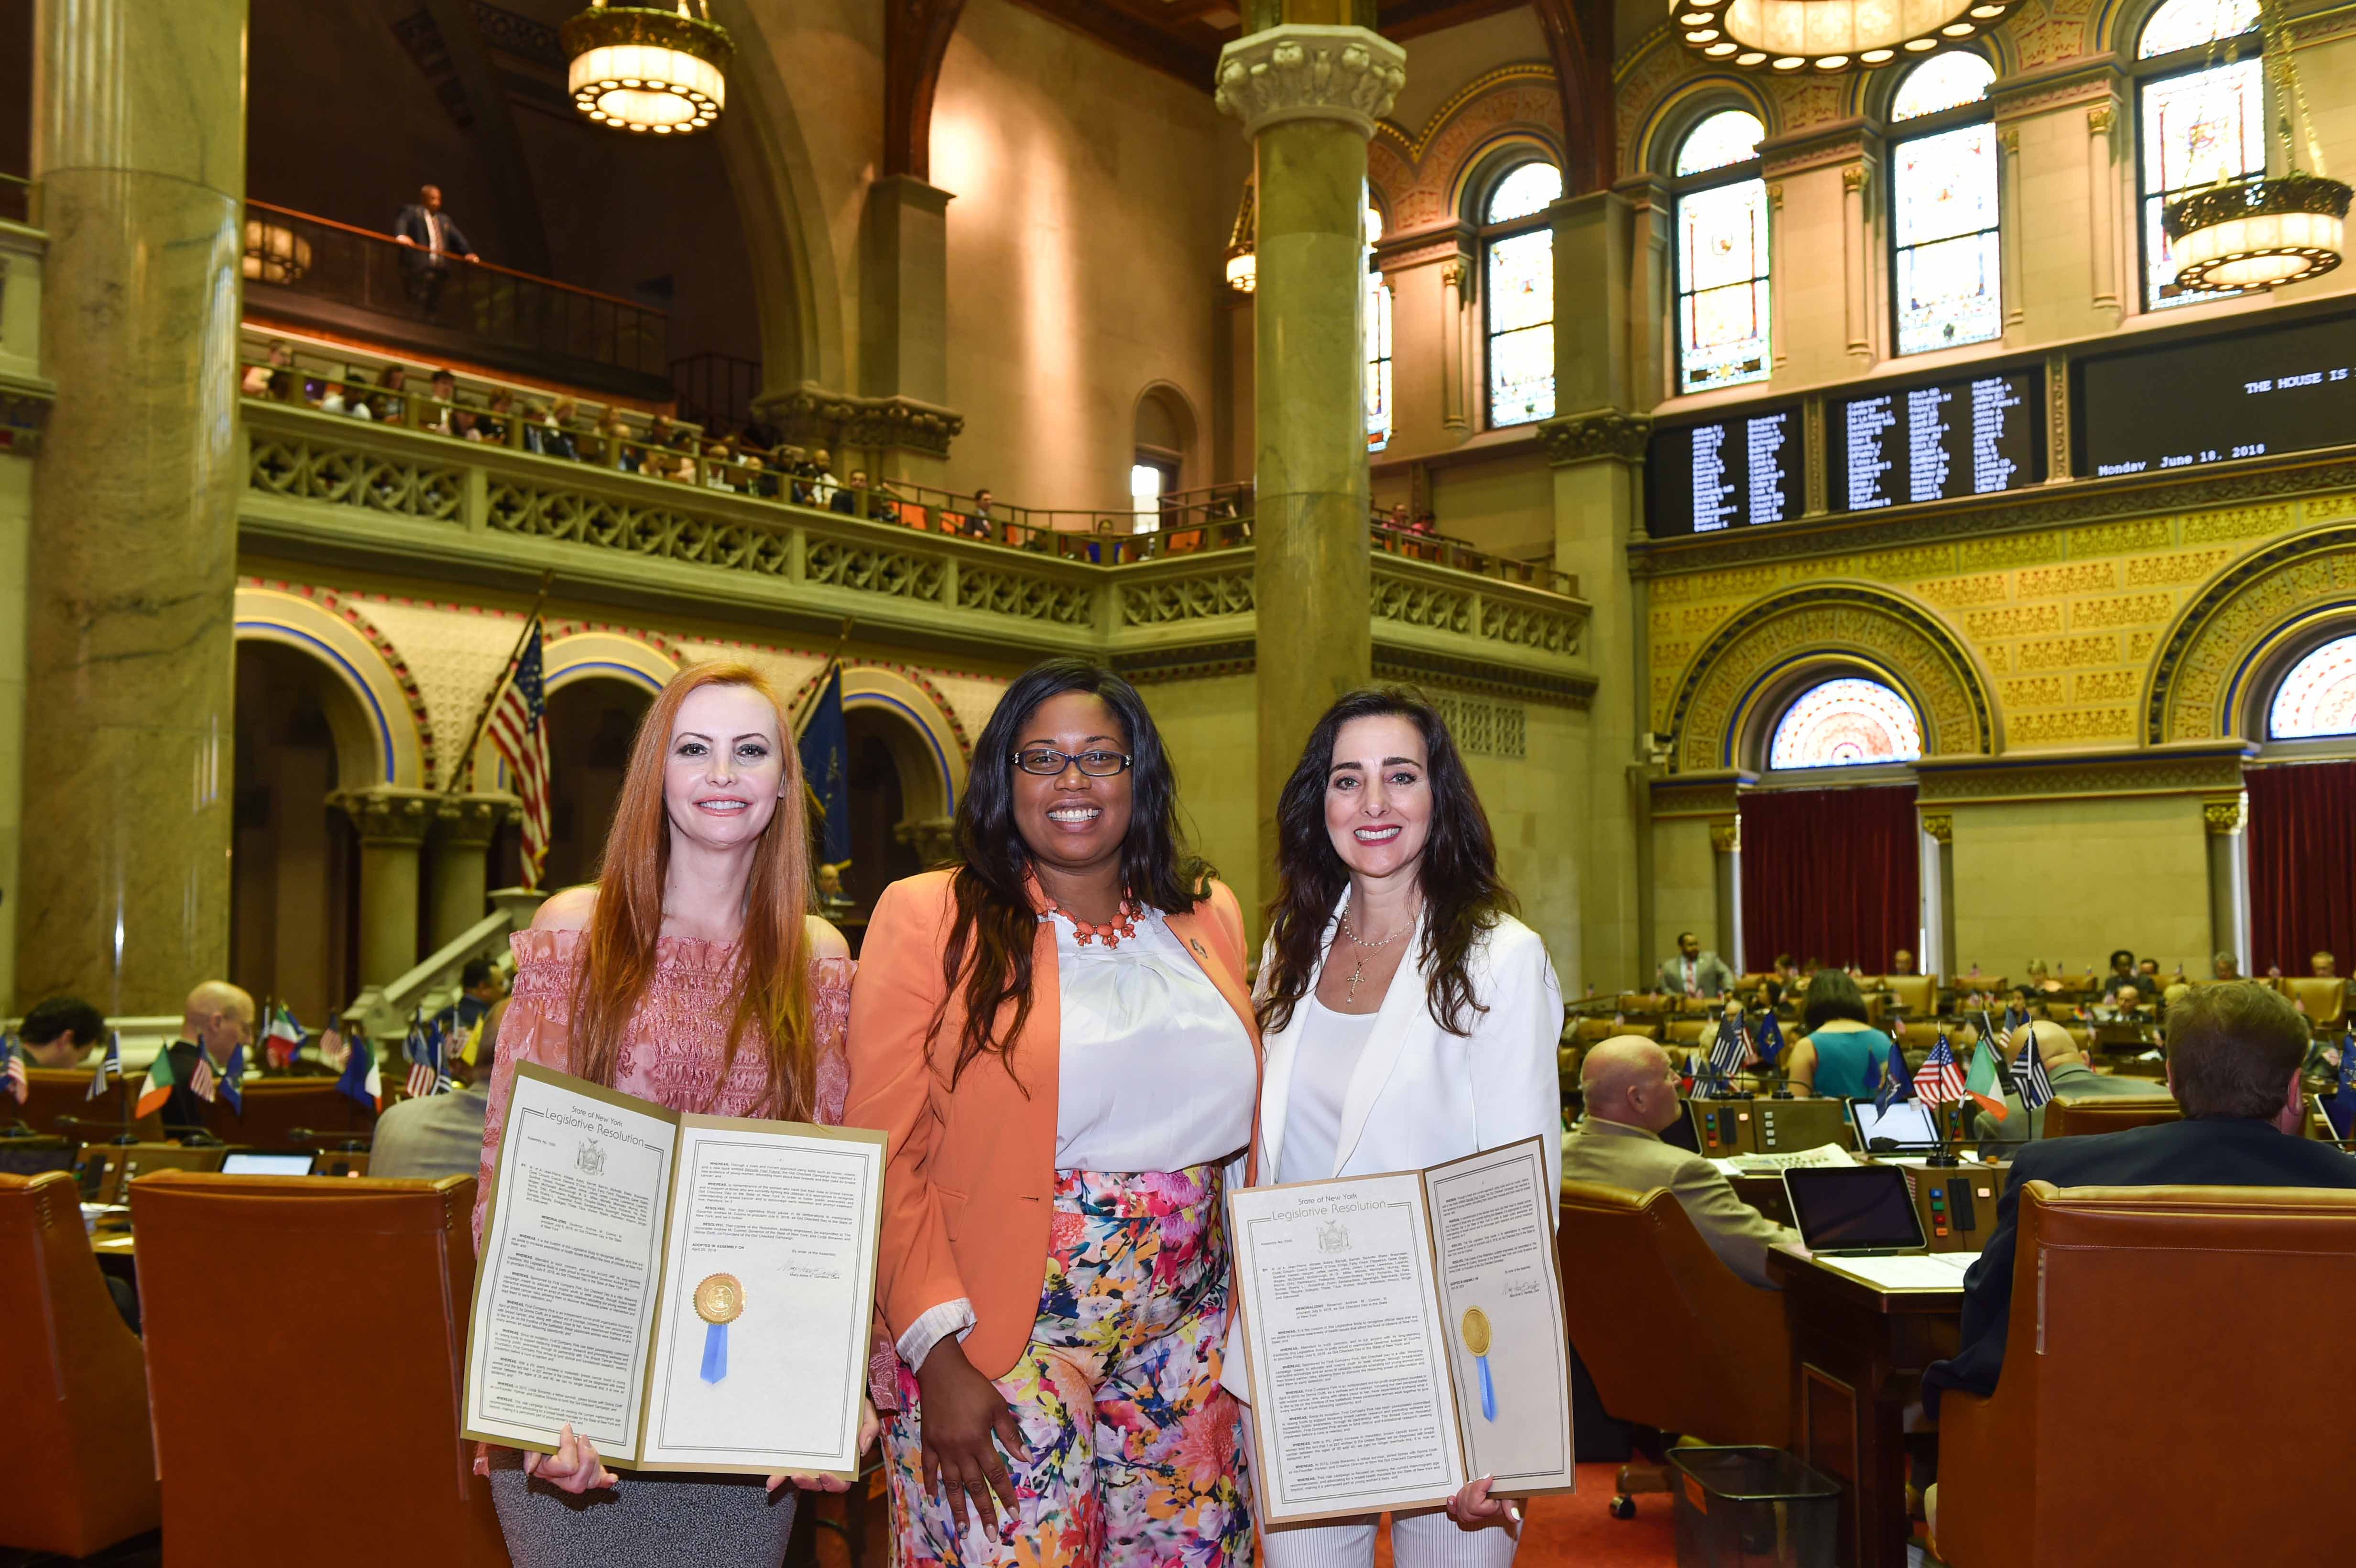 Assemblywoman Kimberly Jean-Pierre with Donna Cioffi and Linda Bonanno from First Company Pink, a non-profit organization dedicated to breast cancer education and prevention.